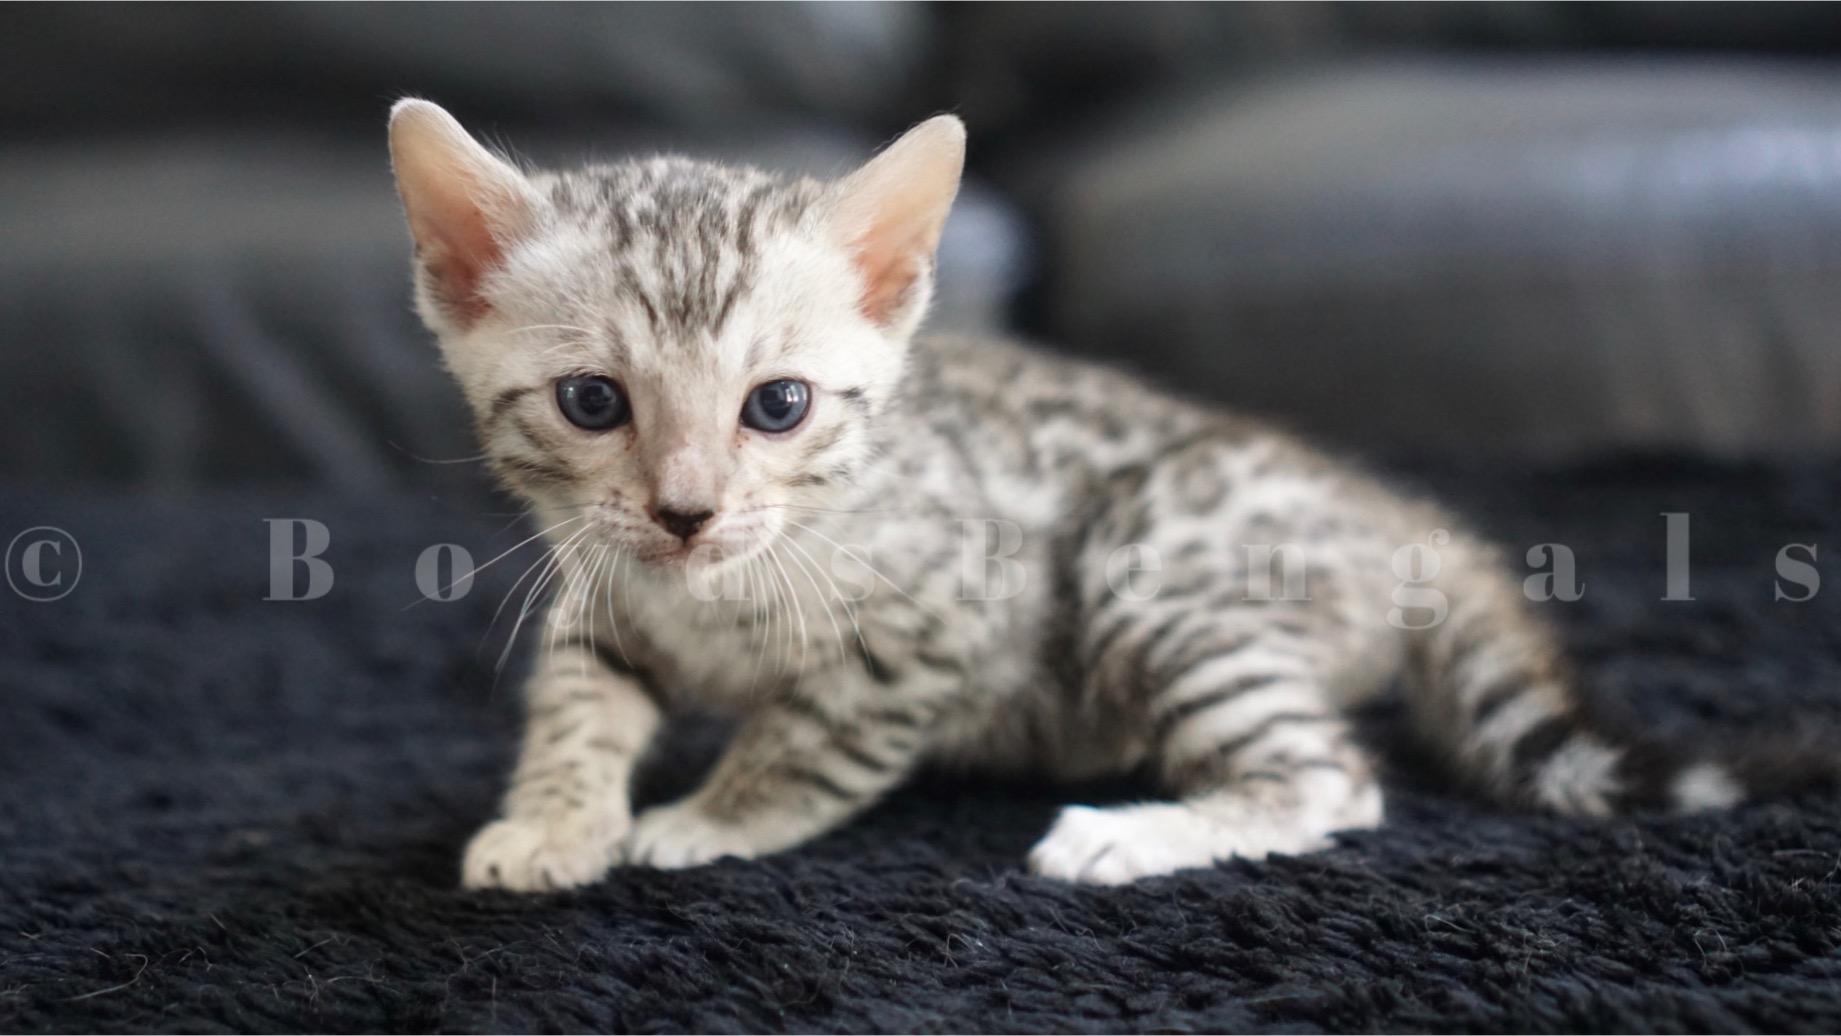 Available Bengal Kittens For Sale BoydsBengals